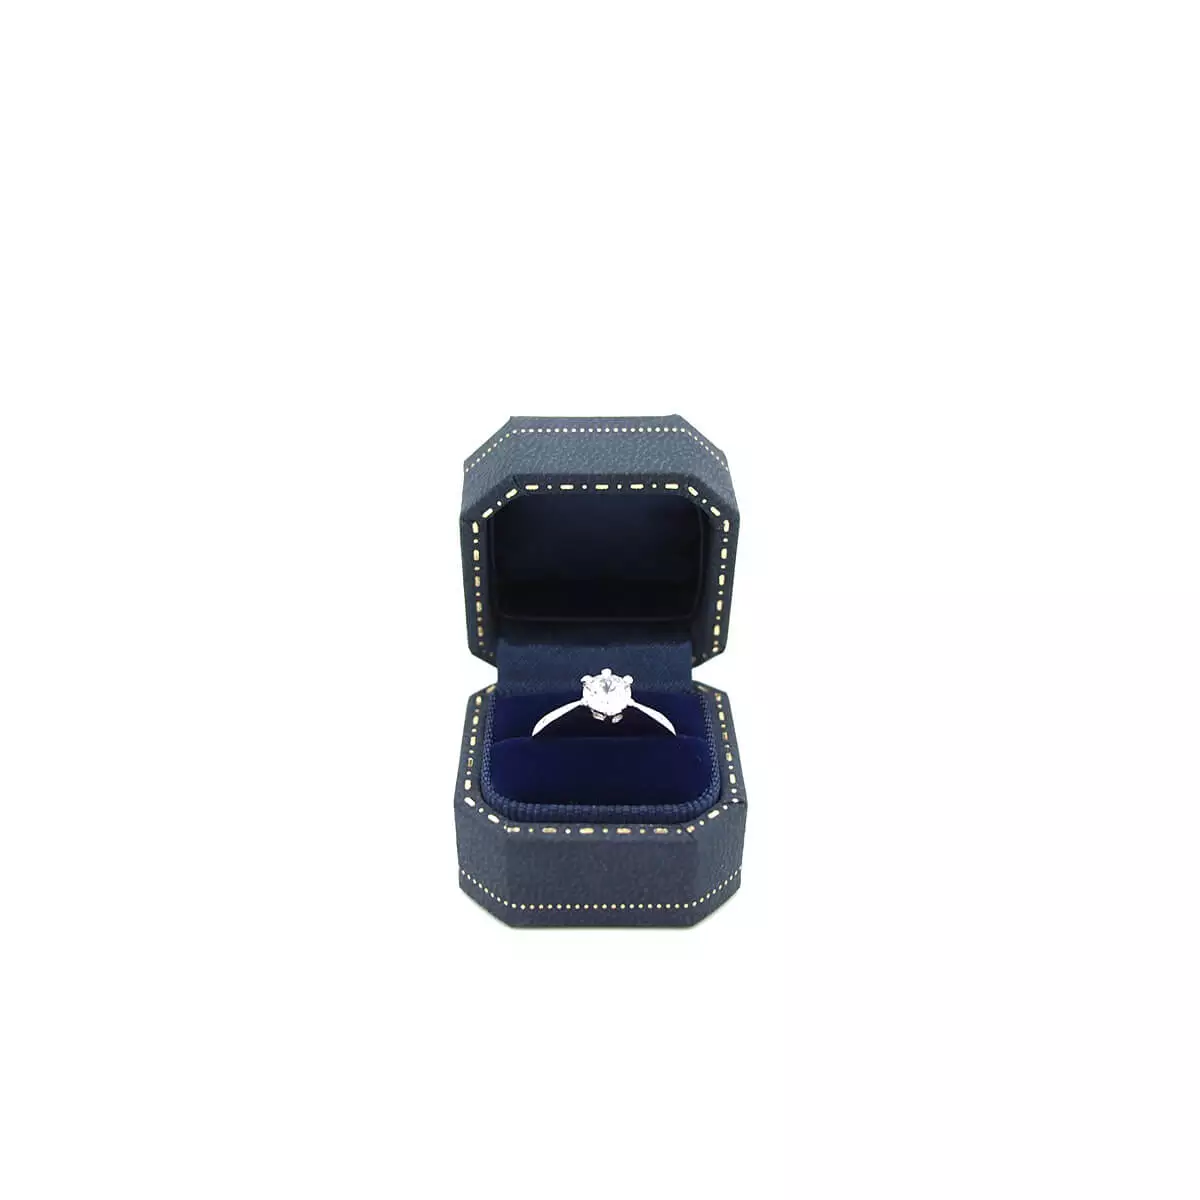 kaia ring box in blue opening